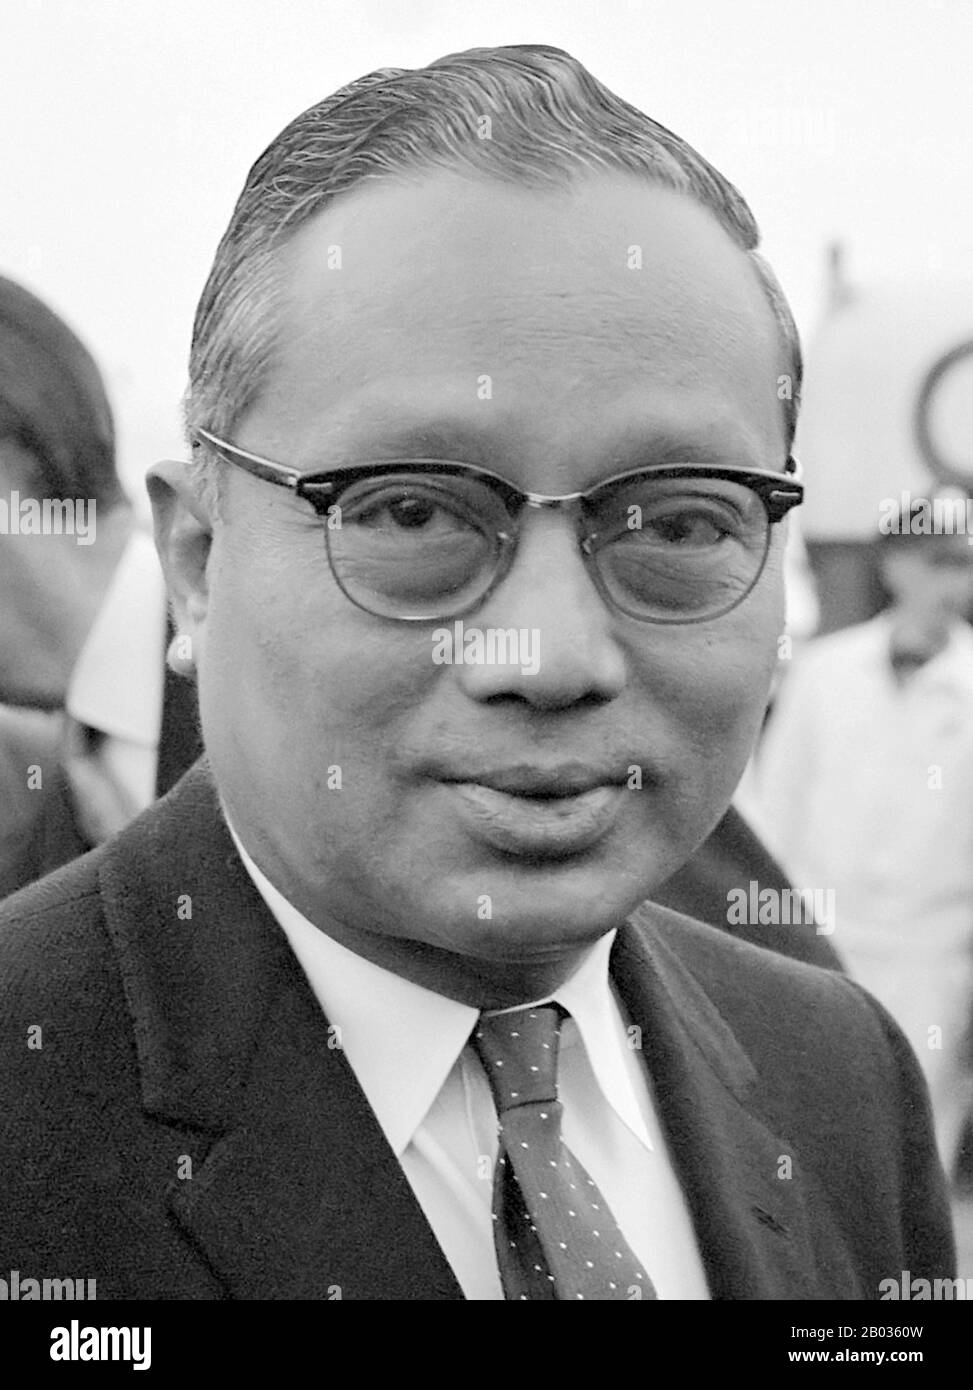 U Thant ( January 22, 1909 – November 25, 1974) was a Burmese diplomat and the third Secretary-General of the United Nations from 1961 to 1971.   A native of Pantanaw, Thant was educated at the National High School and at Rangoon University. In the days of tense political climate in Burma, he held moderate views positioning himself between fervent nationalists and British loyalists. He was a close friend of Burma's first Prime Minister U Nu and served various positions in Nu's cabinet from 1948 to 1961.   He was appointed as Secretary-General in 1961 when his predecessor, Dag Hammarskjöld died Stock Photo